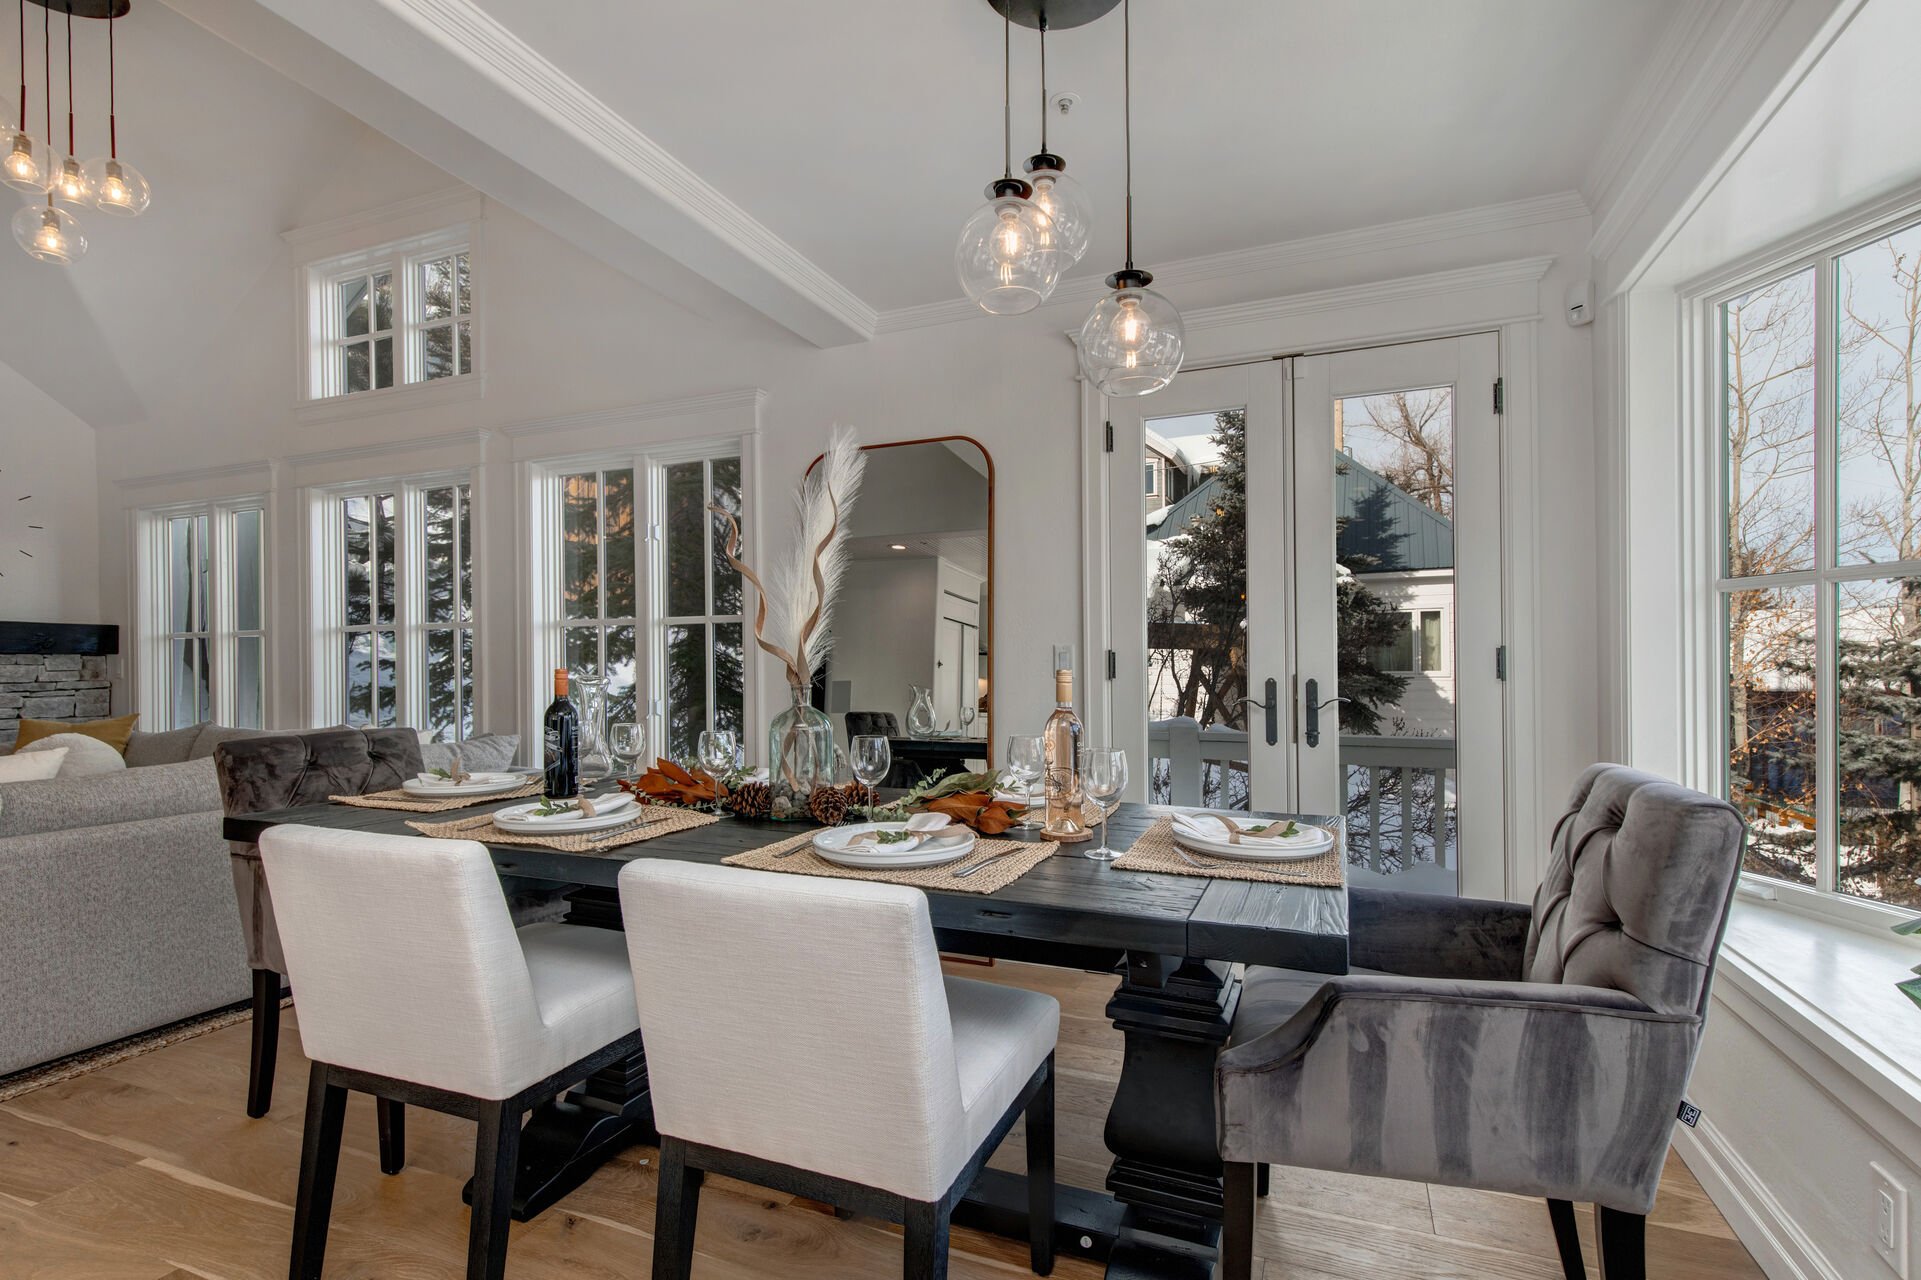 Dining Area with a Bay Window with Old Town Views